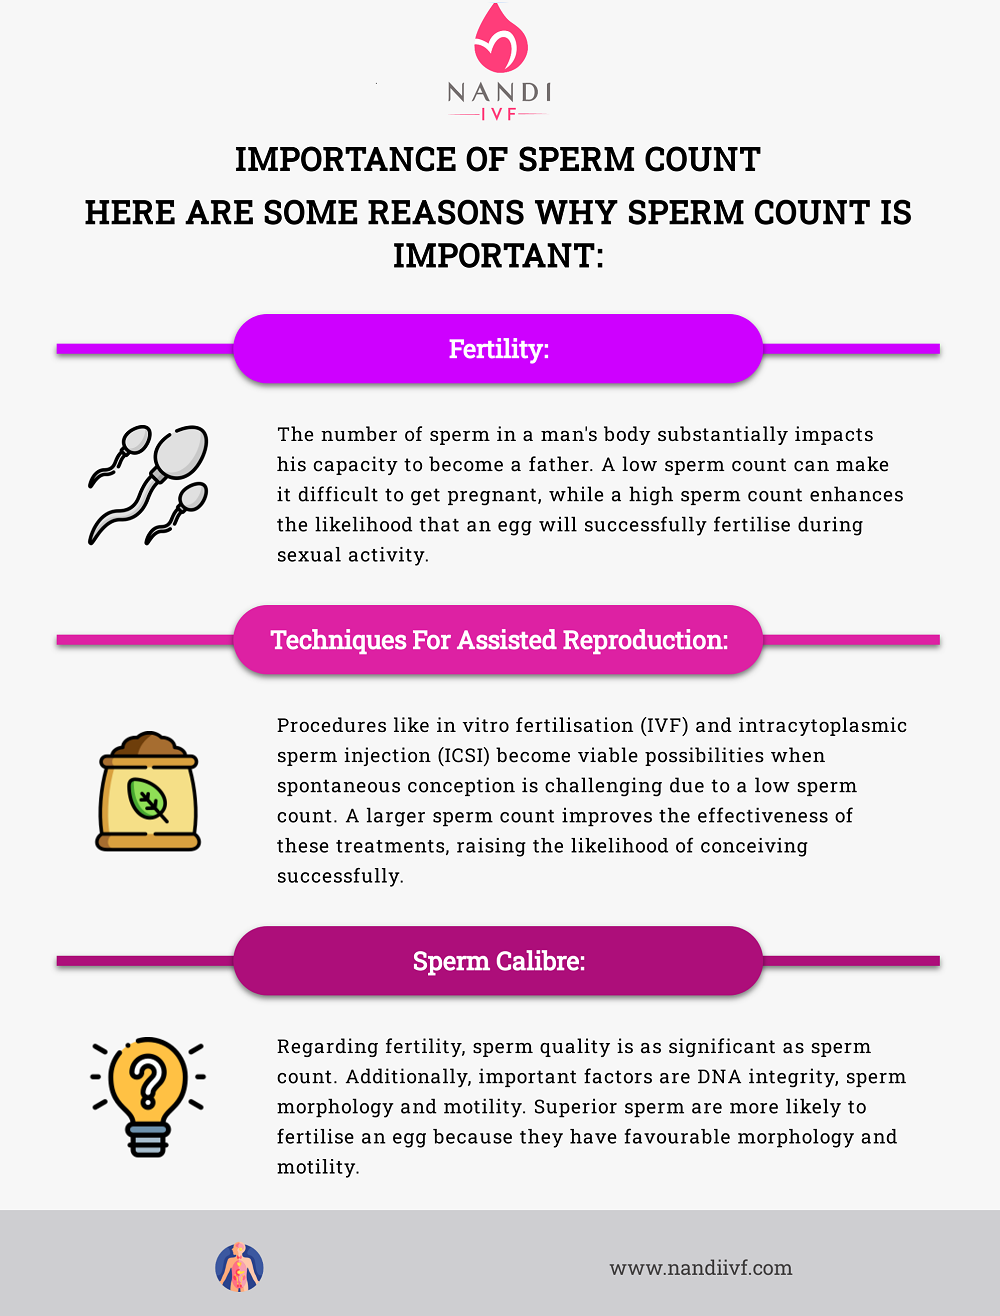 Importance of Sperm Count